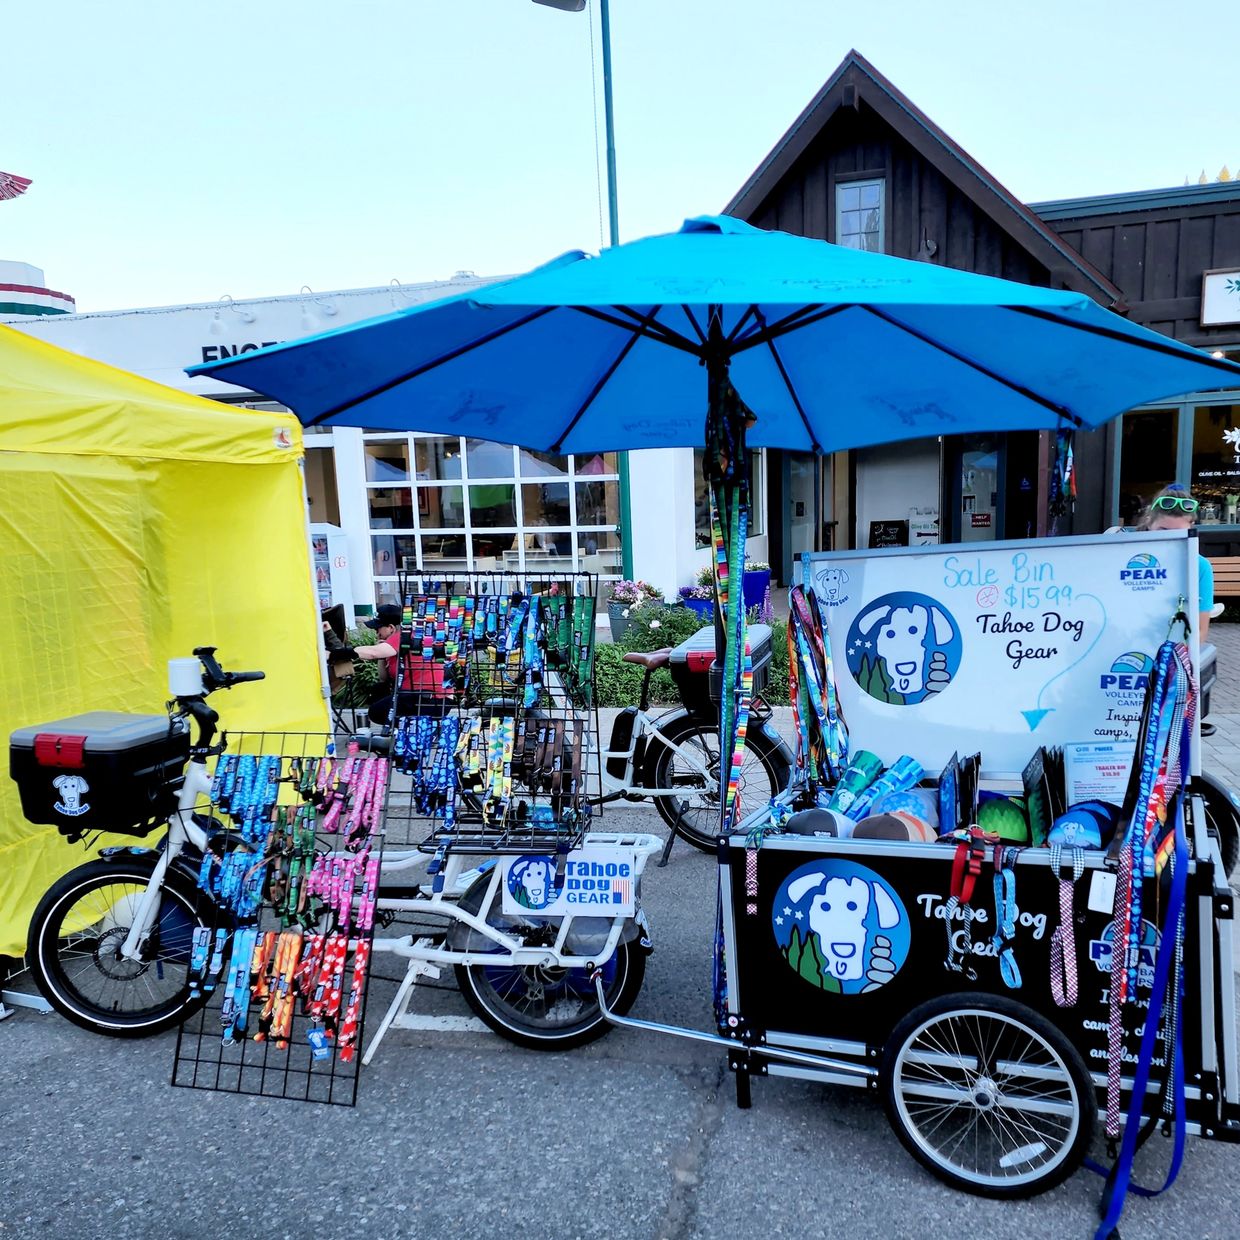 Tahoe Dog Gear bicycle and trailer festival booth